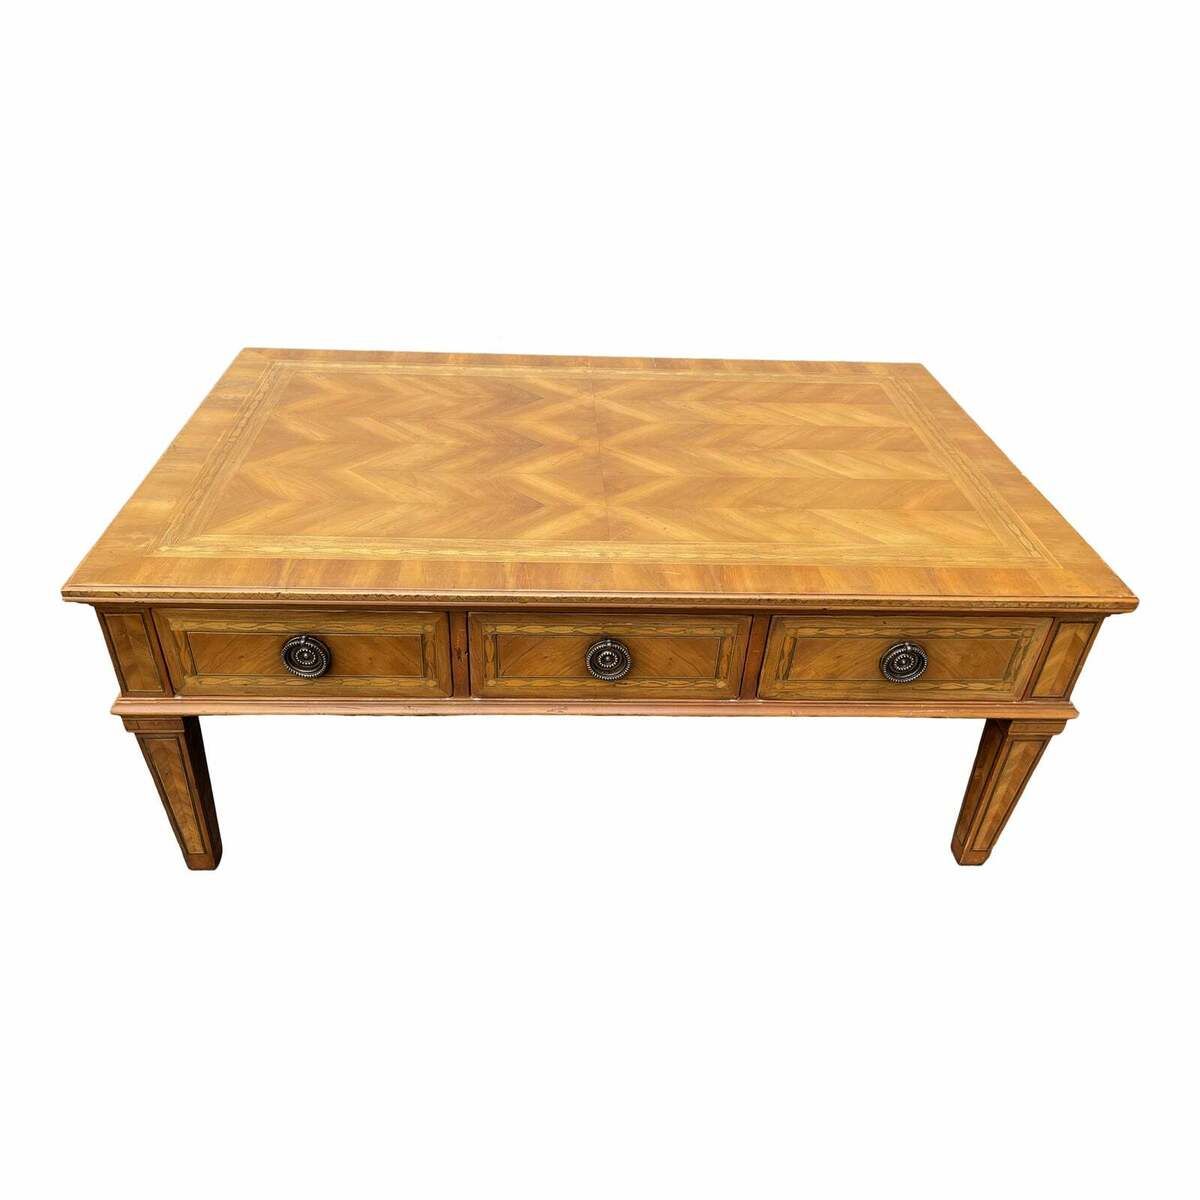 Alfonso Marina Ebanista Rectangular Inlaid Fruitwood Coffee Table | Ebay Pertaining To Pemberly Row Replicated Wood Coffee Tables (View 3 of 11)